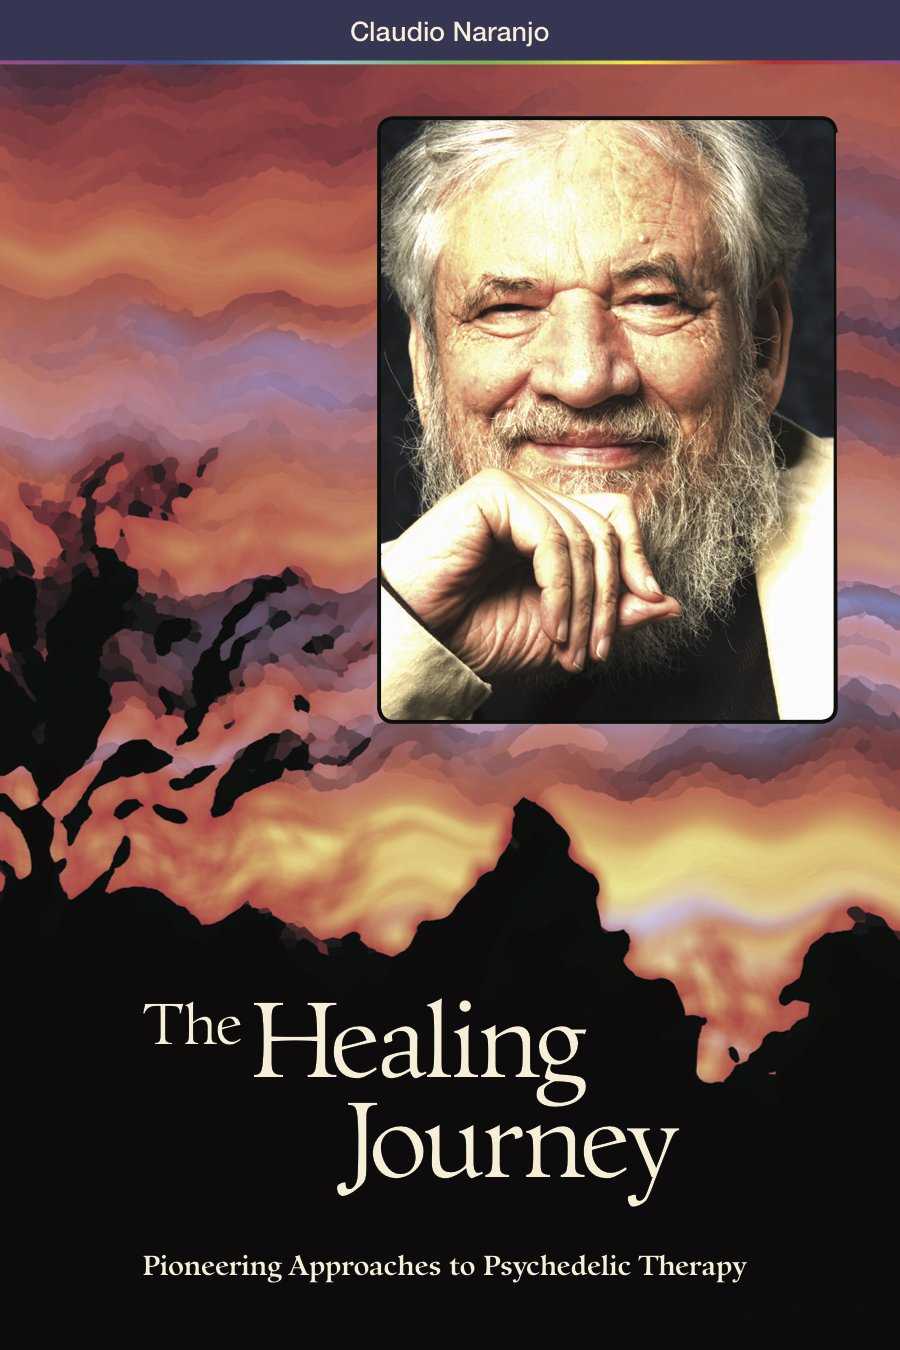 Claudio Naranjo - The Healing Journey: Pioneering Approaches to Psychedelic Therapy